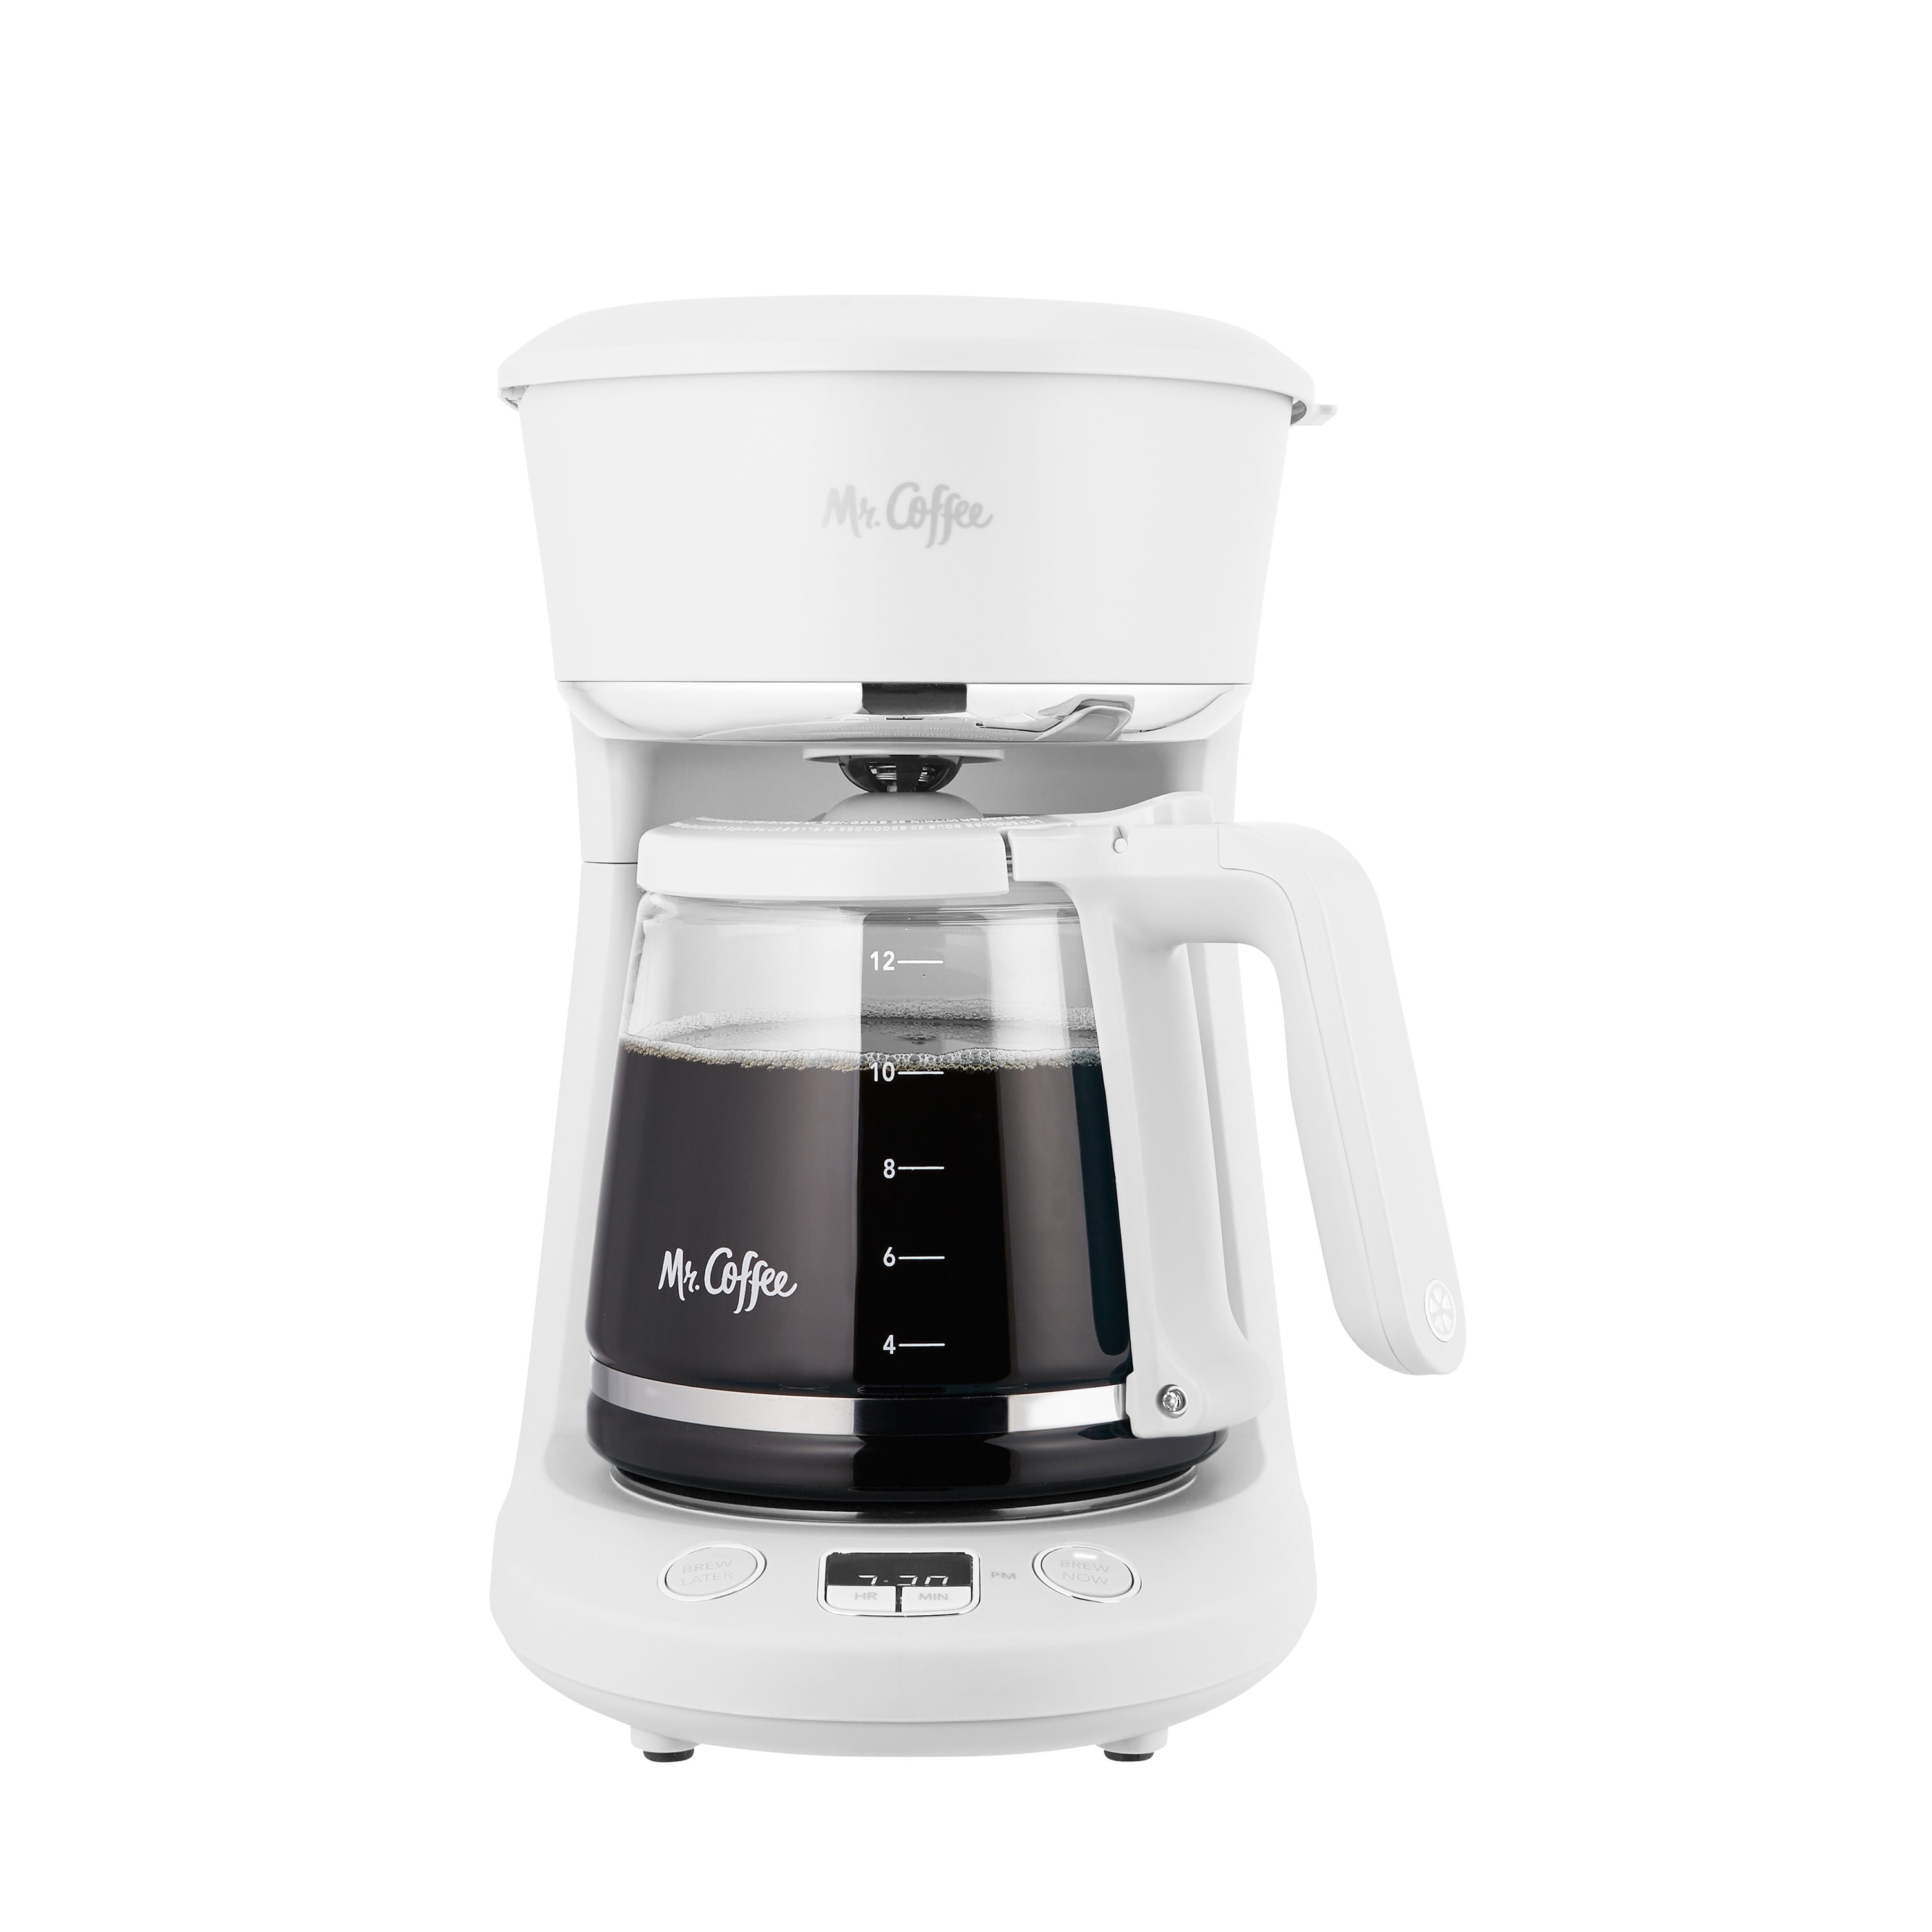 Coffee DR4-NP 4 Cup Coffee Maker Mr White for sale online 